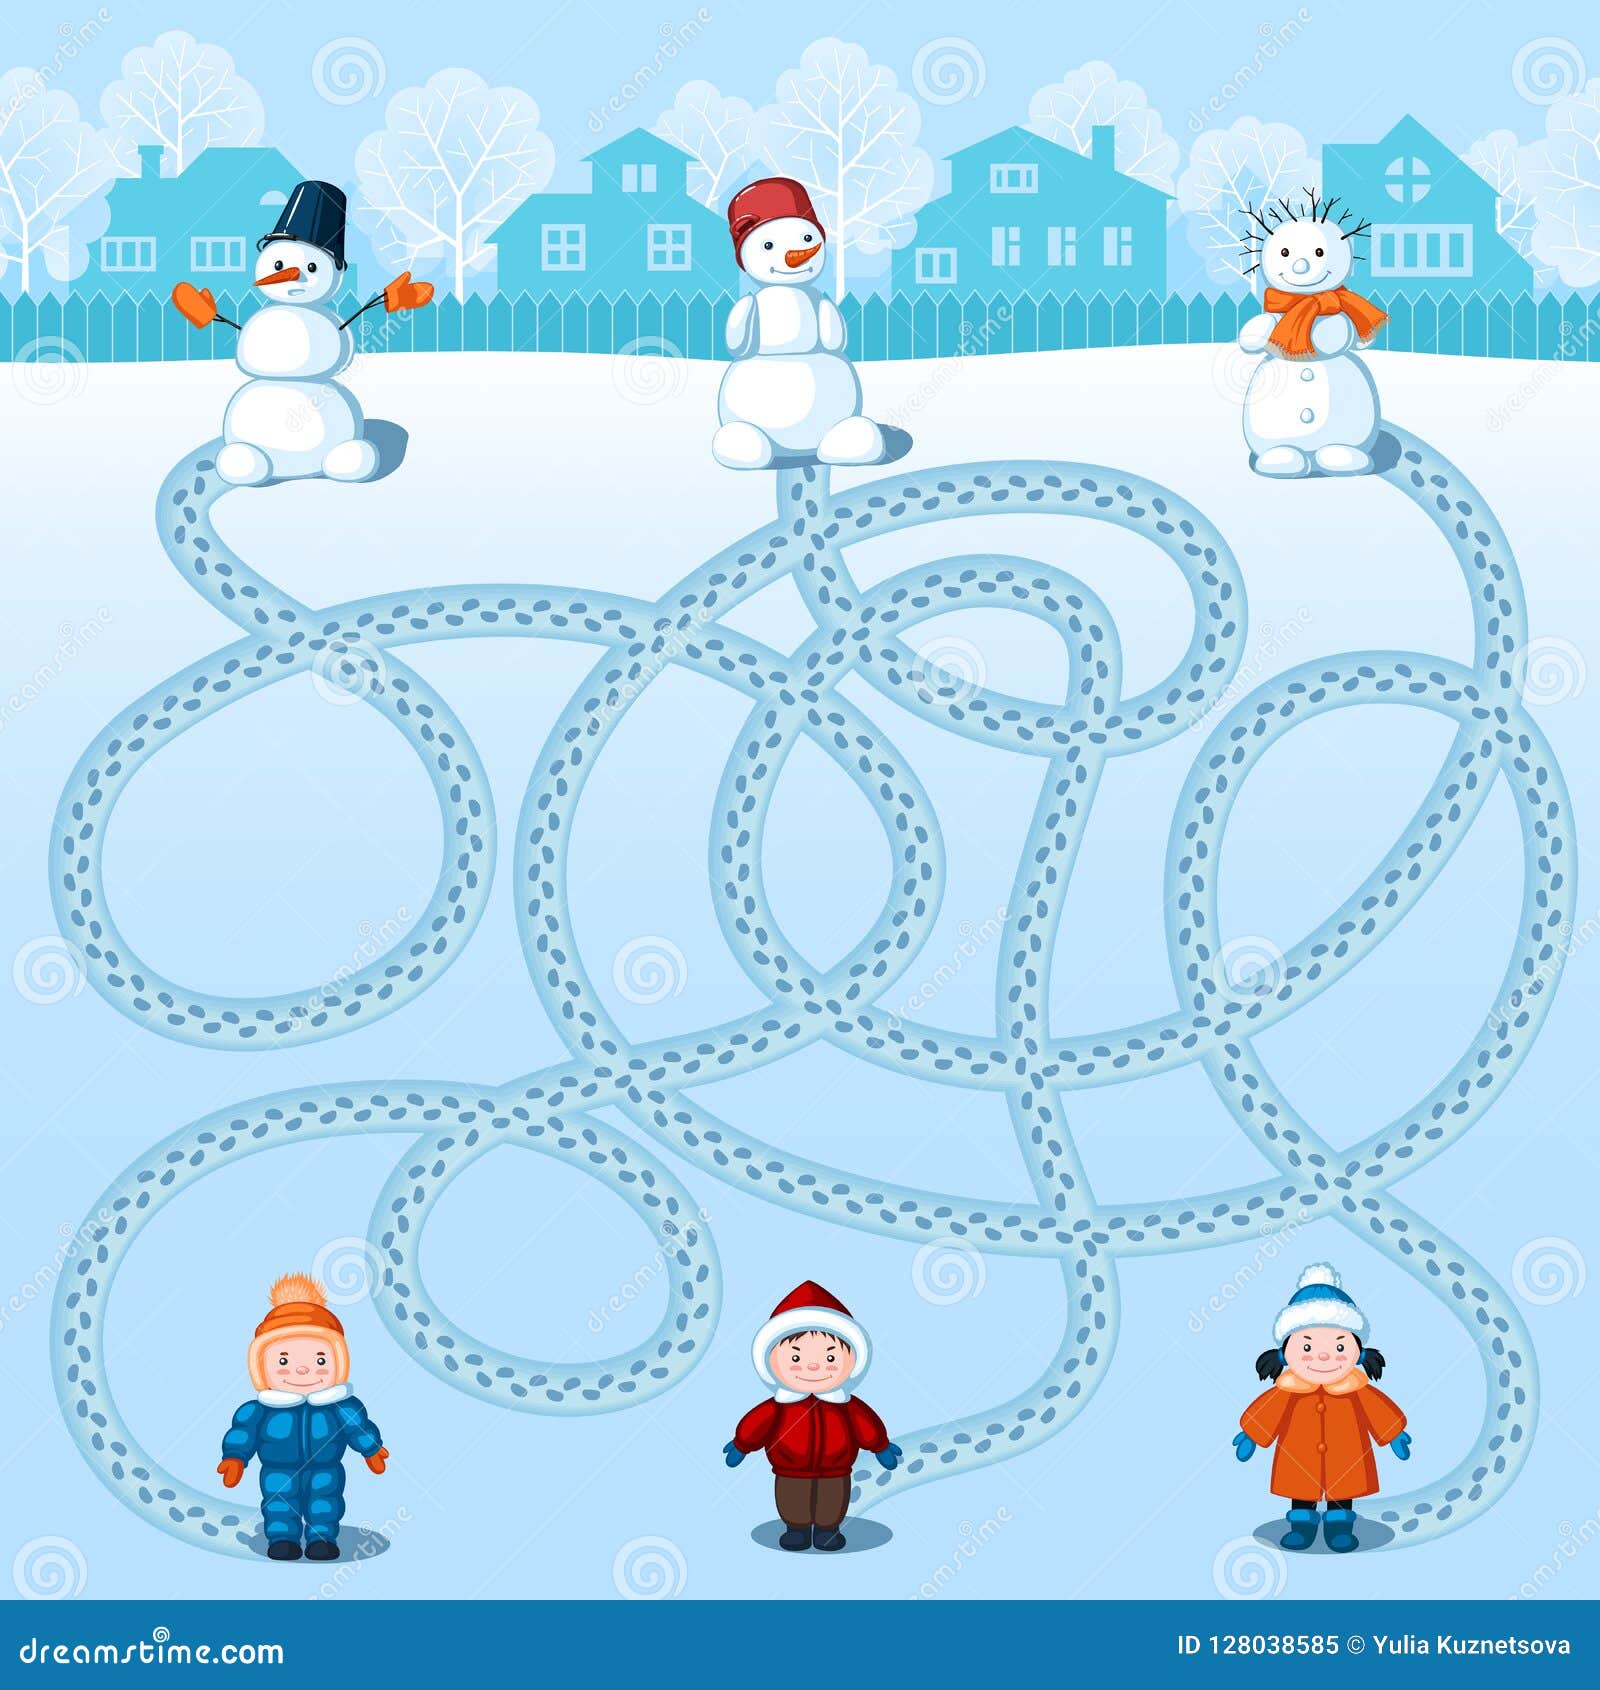 three children in winter coats make three snowmen. find whose is where? picture with a riddle